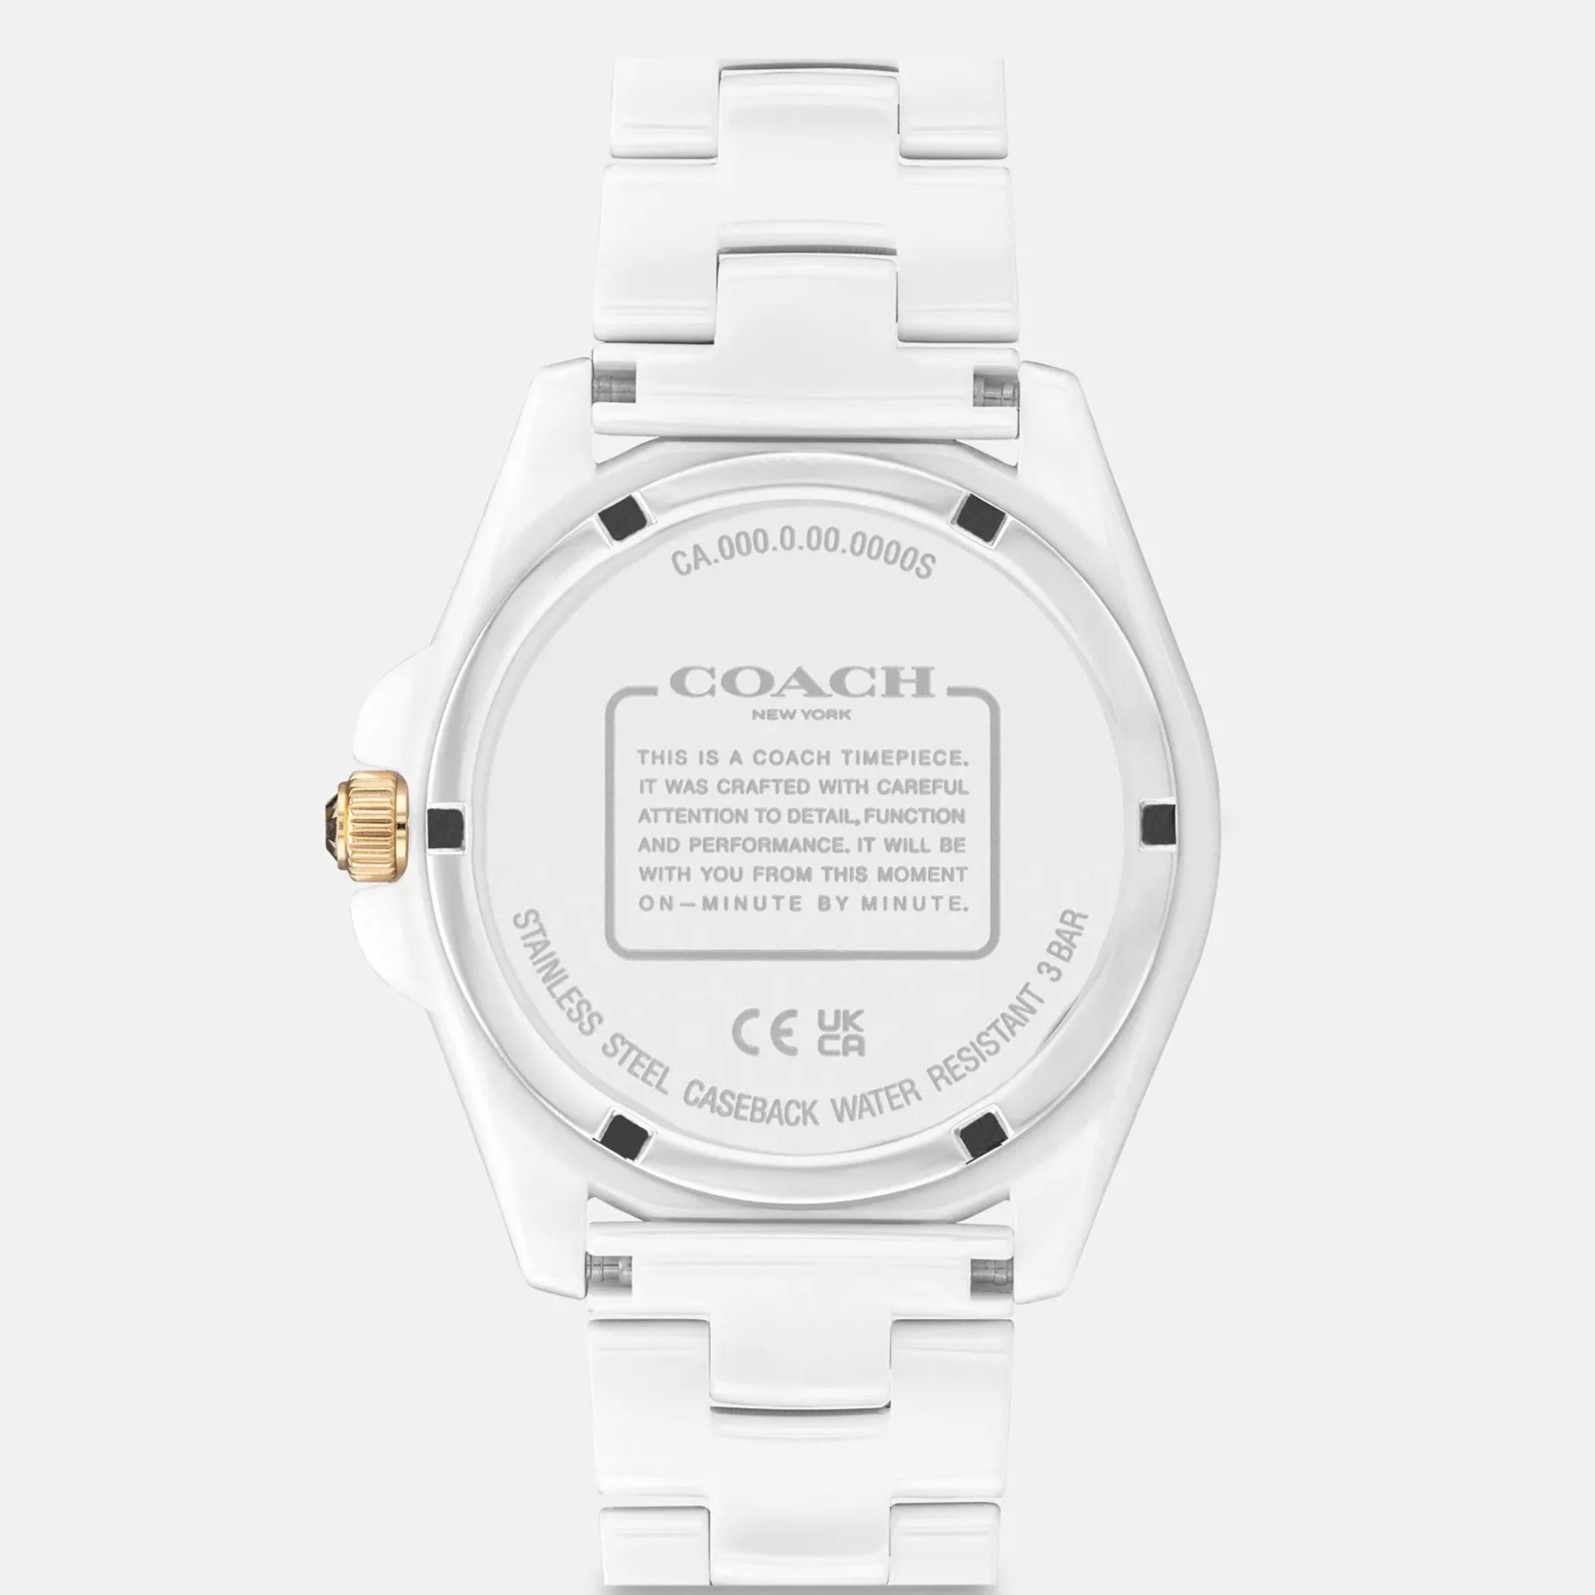 ĐỒNG HỒ ĐEO TAY NỮ COACH LADIES GREYSON MULTI-COLOR CRYSTAL ACCENT RAINBOW BEZEL WHITE CERAMIC WATCH 14504019 7